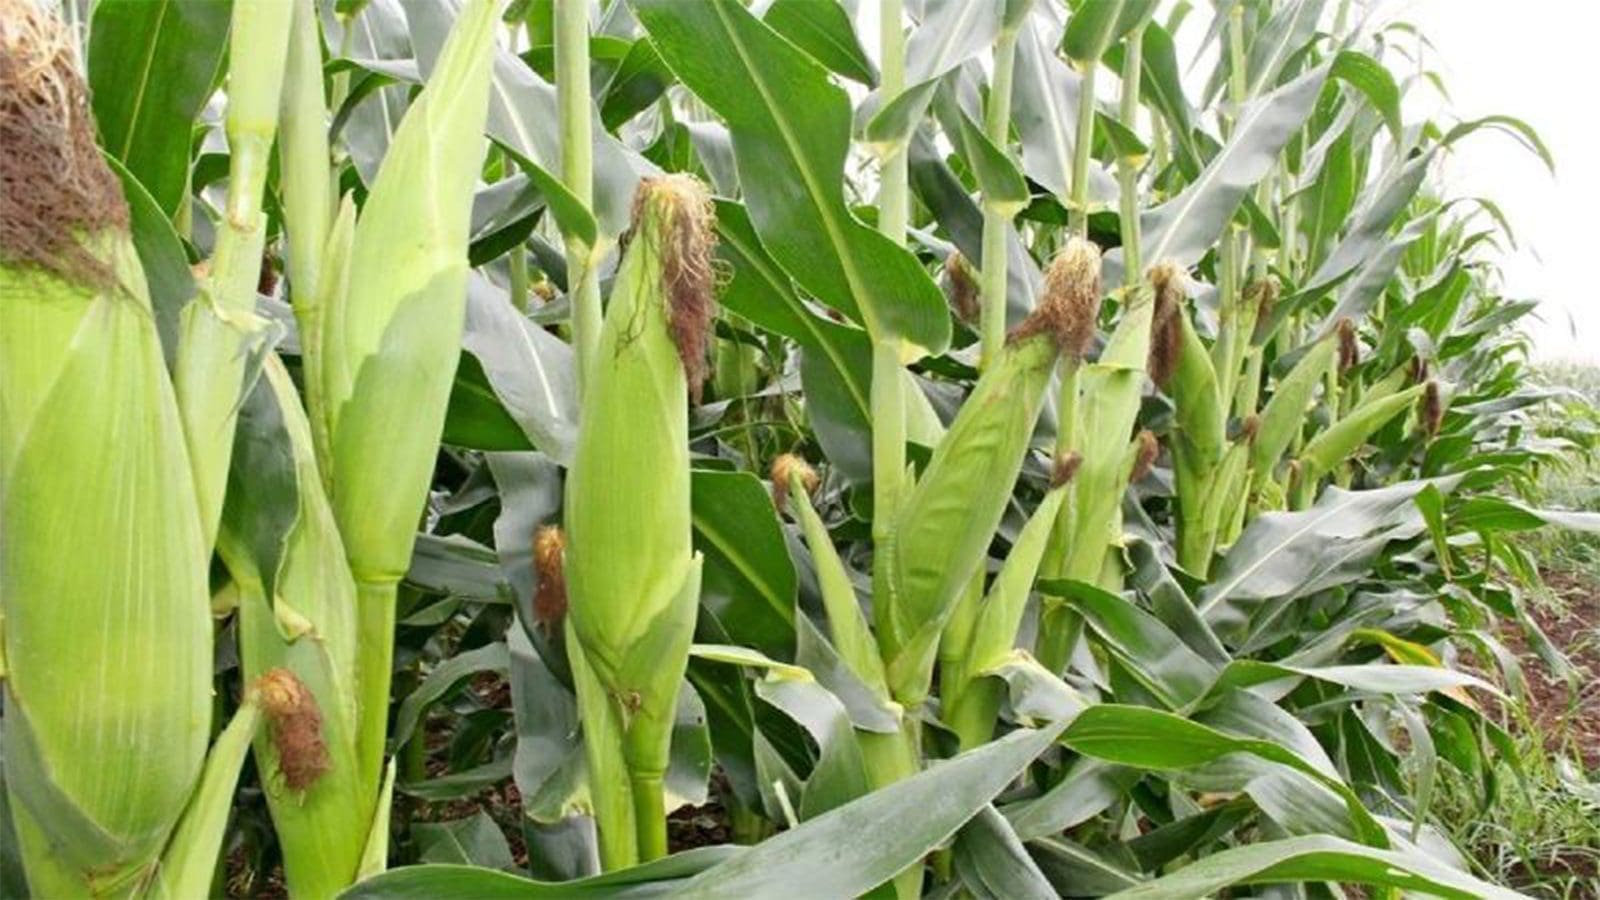 South Africa’s maize yields steady to sustain domestic demand despite decline in production